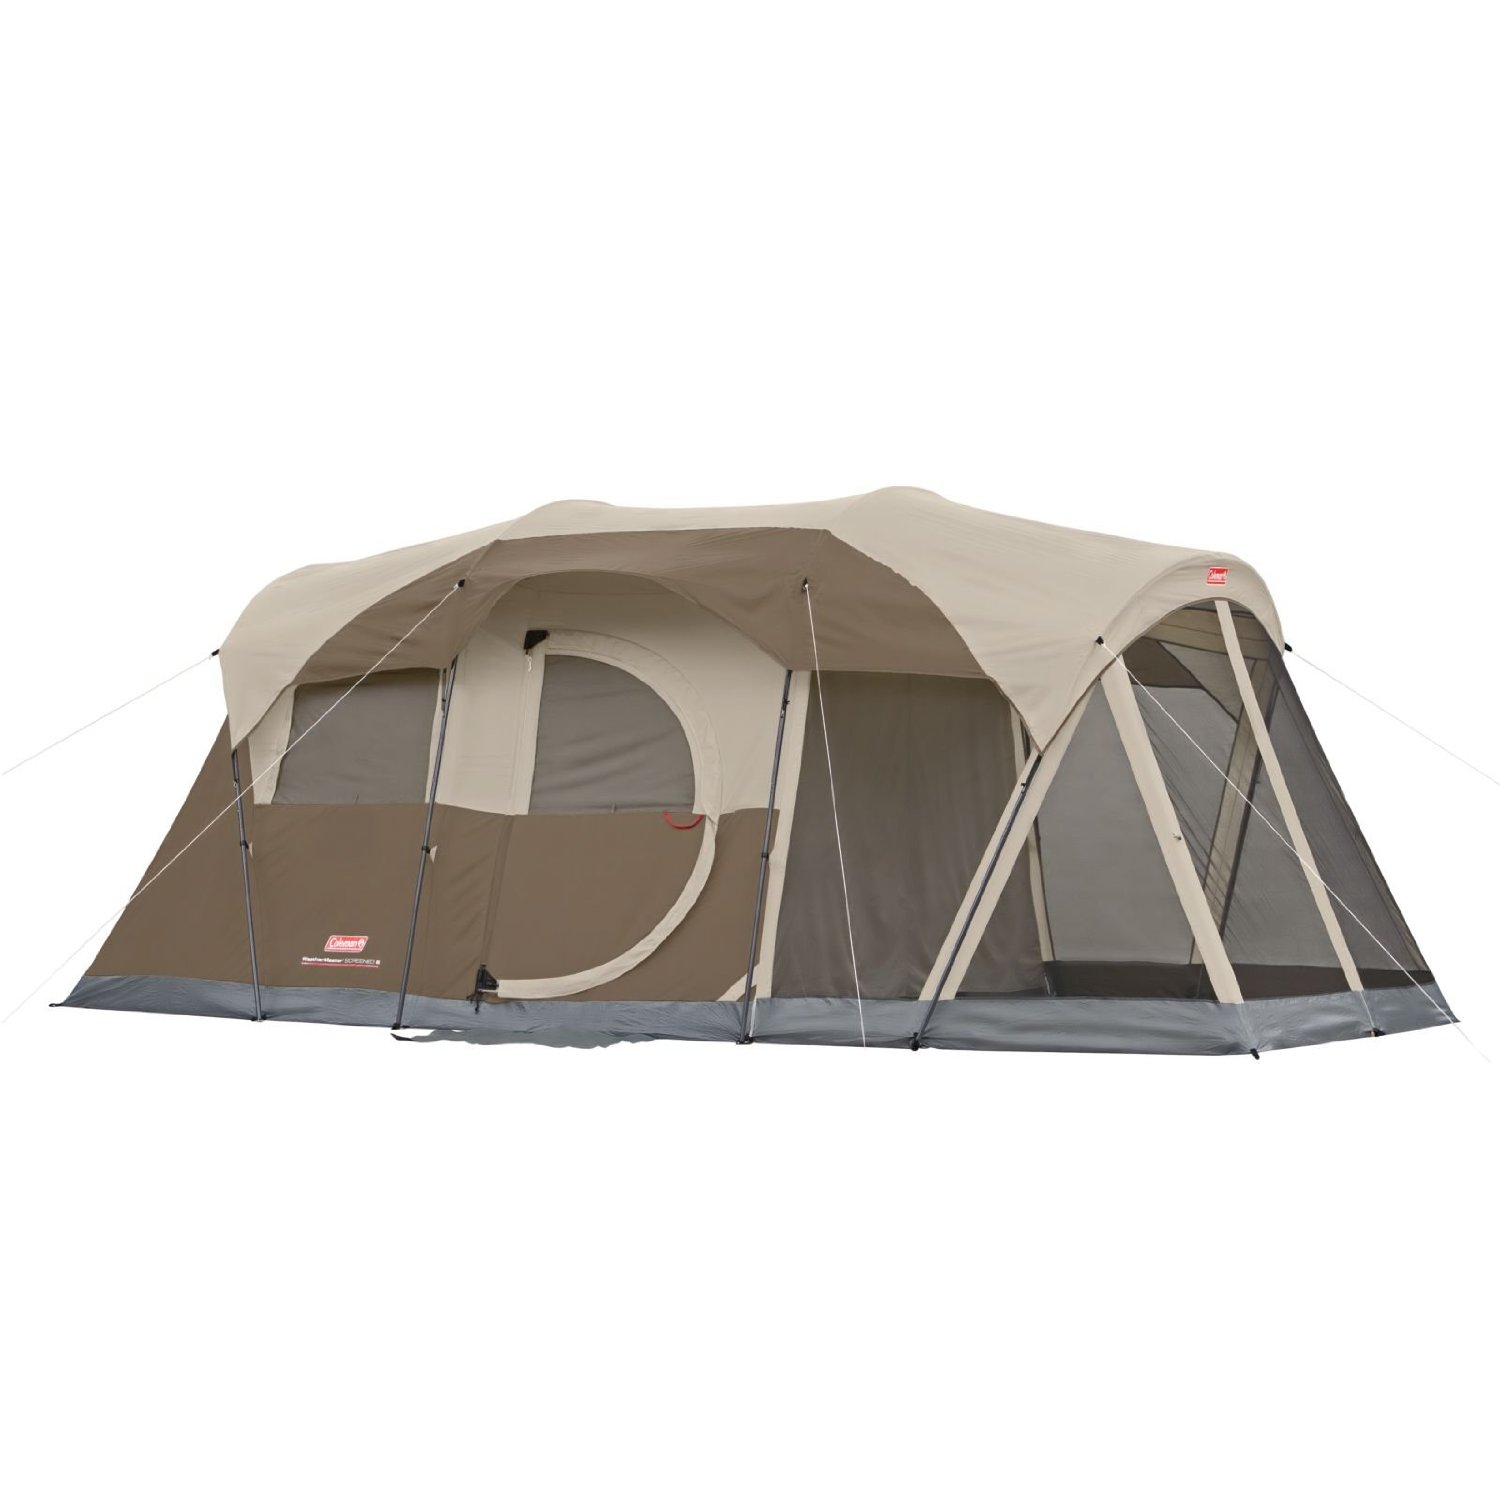 Today only: Save up to 58% on Coleman camping gear